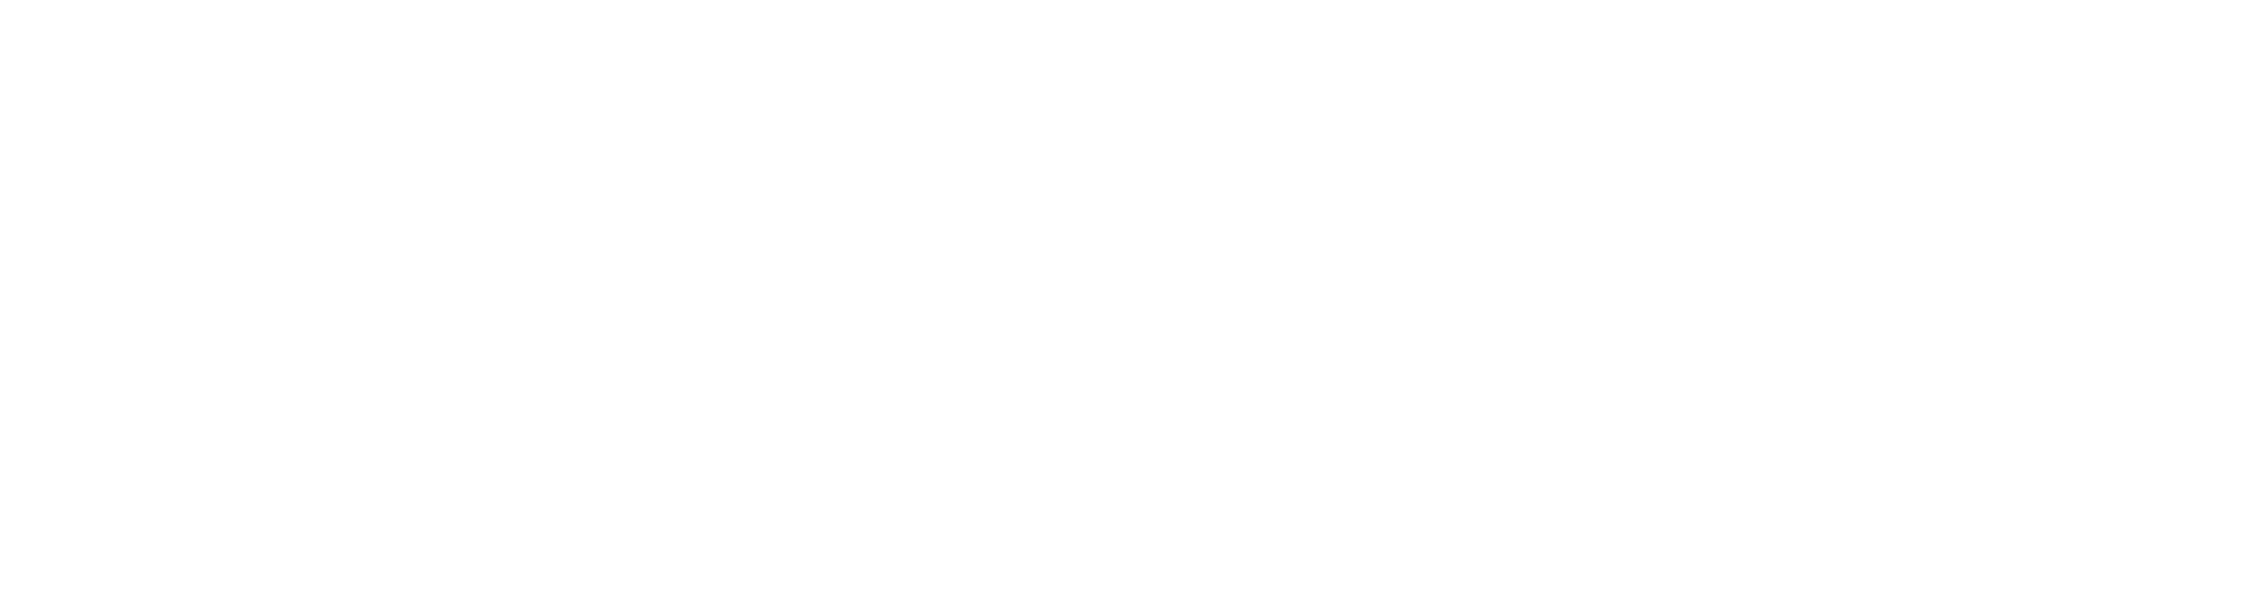 Intersect Online